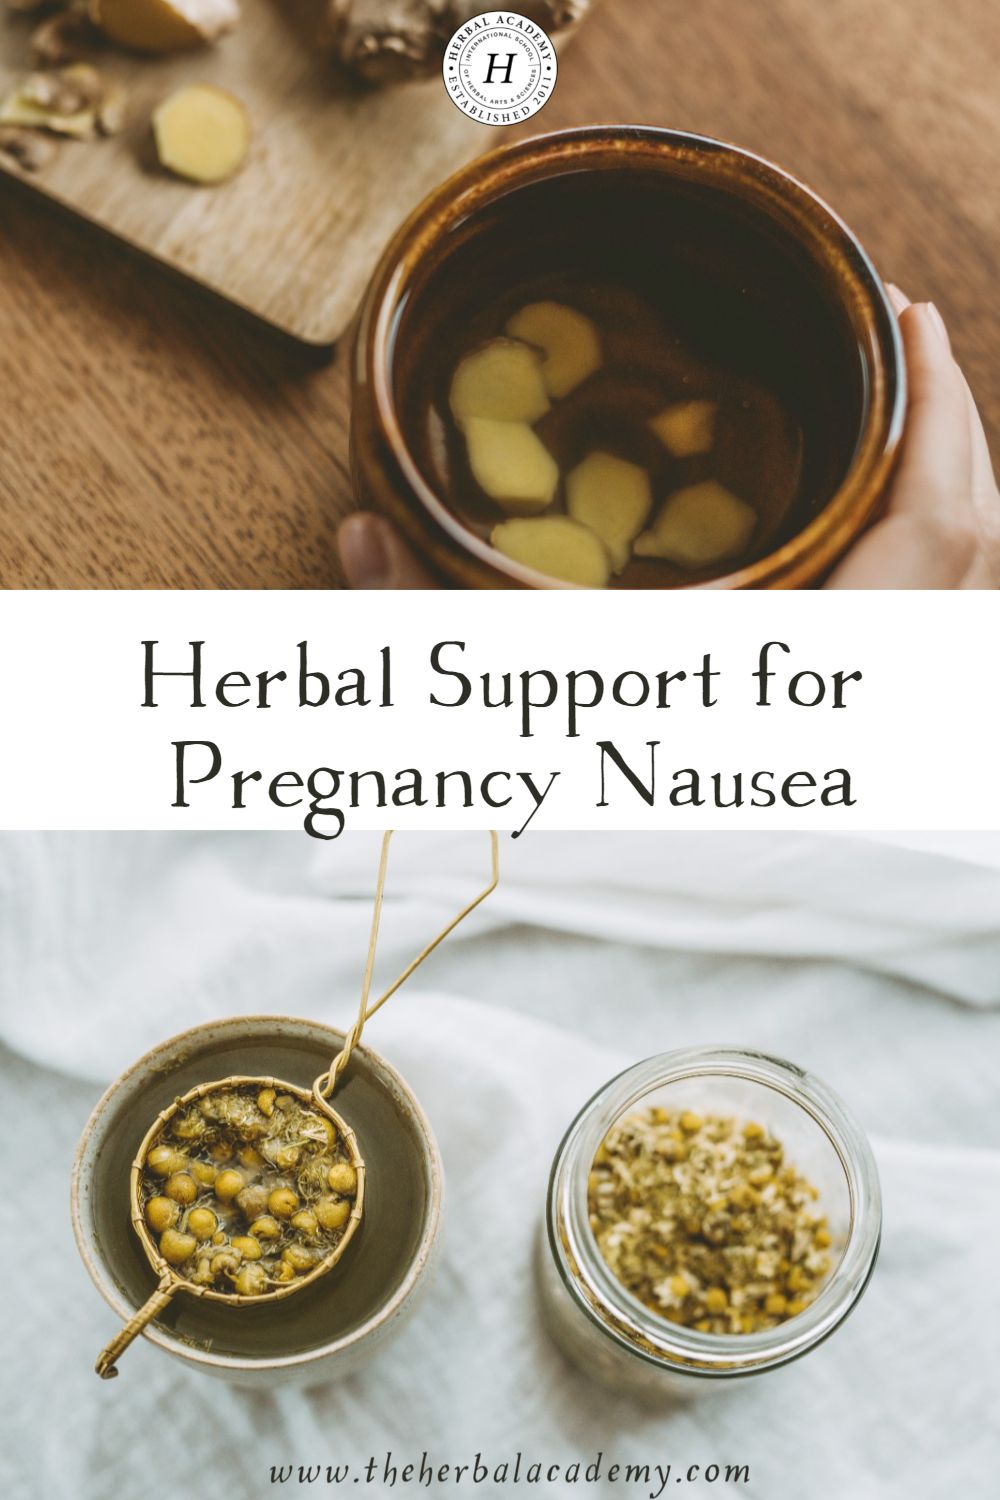 Herbal Support for Pregnancy Nausea | Herbal Academy | Even though early pregnancy nausea can be really challenging, you will find some holistic approaches and herbs to combat pregnancy nausea.